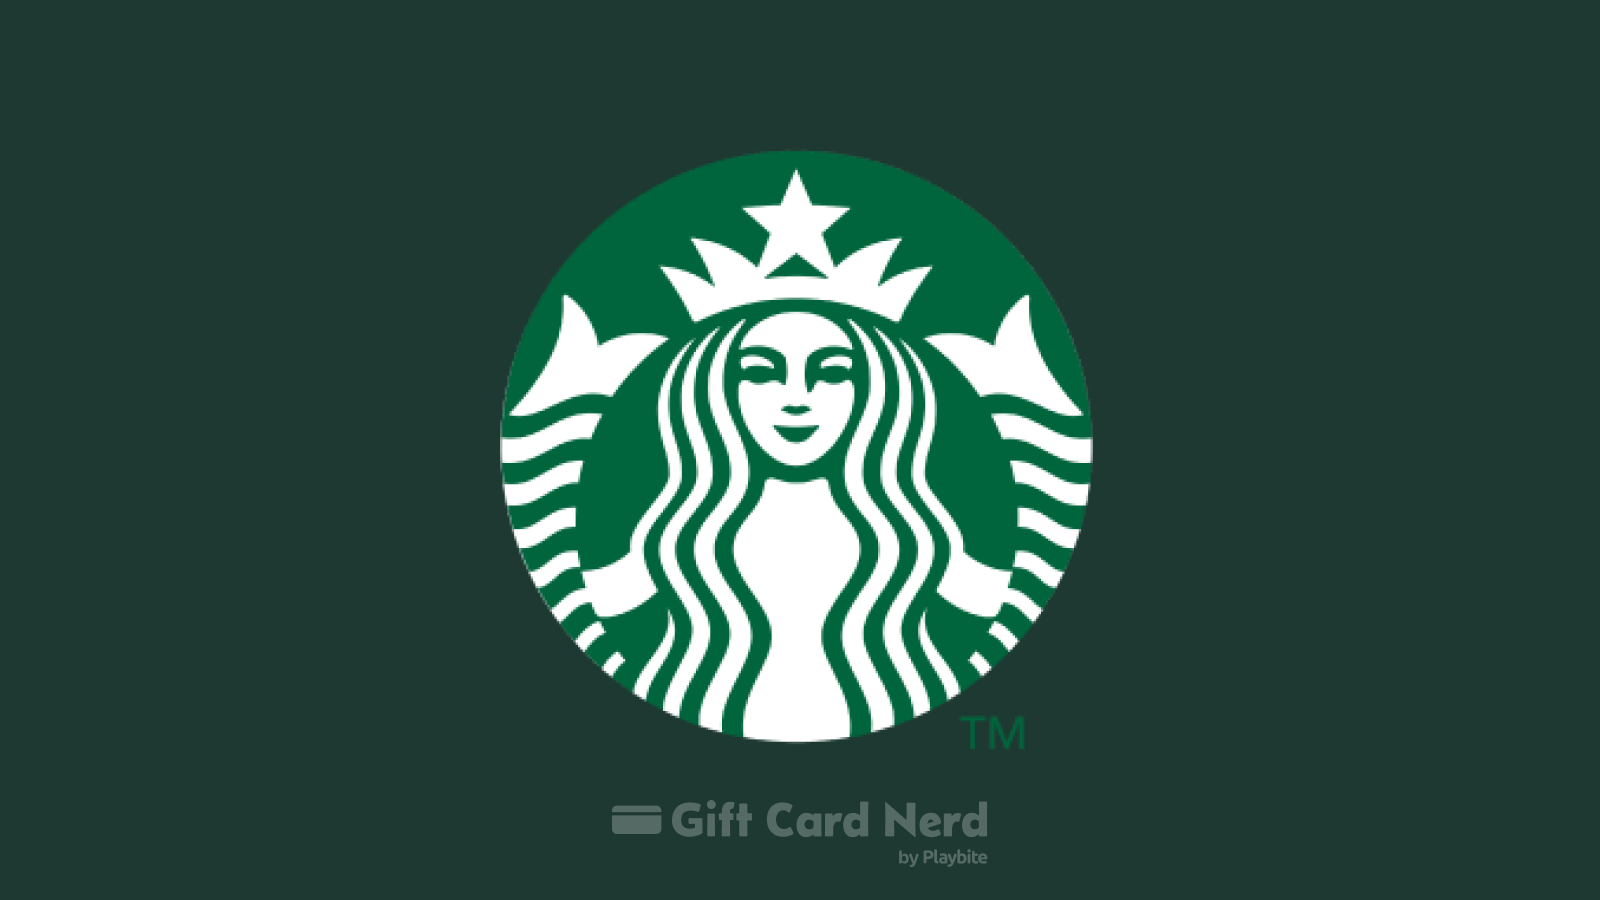 Can I Use a Starbucks Gift Card on Steam?